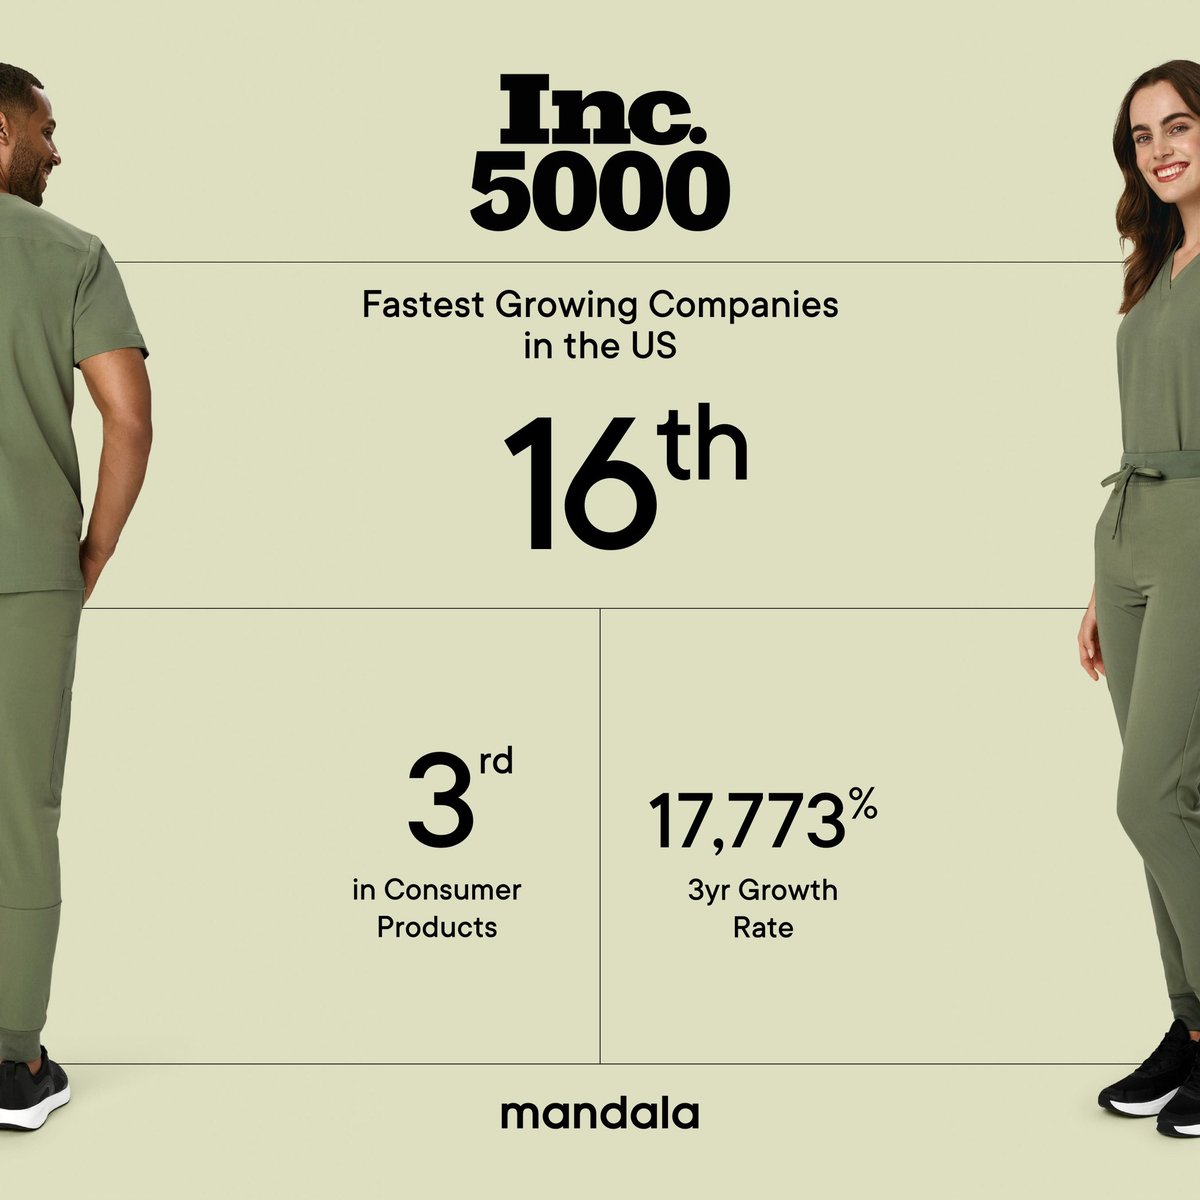 Super excited to announce that  @mandalascrubs ranked as America’s 16th fastest growing company on the #Inc5000 list 🎉

No. 3 in consumer products 
17,773% growth 😀

A big thank you to our partners  @Shopify , @tobi , @harleyf , @usesettle @wayflyerapp for helping us along the…